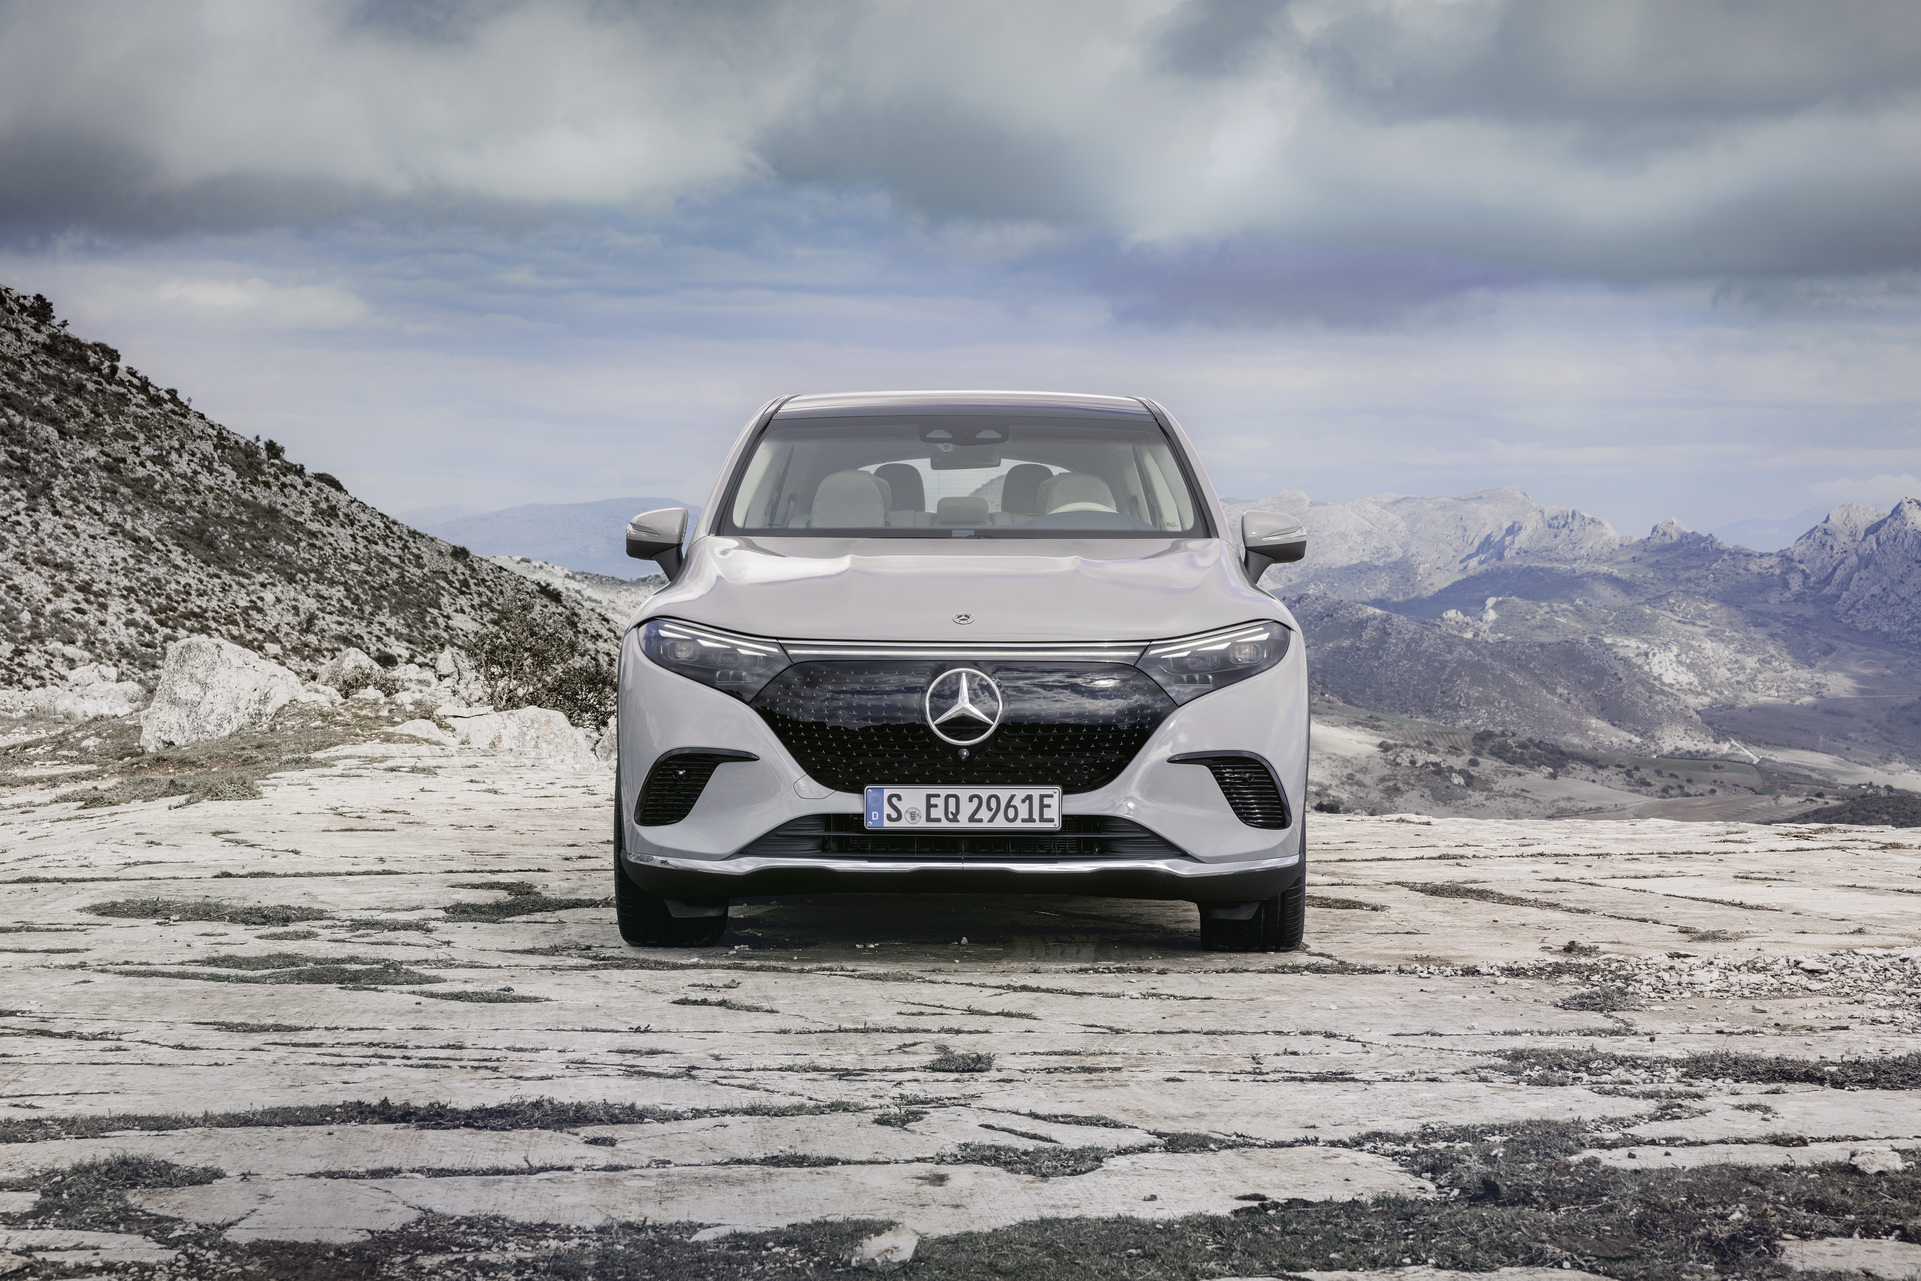 The Mercedes-Benz EQS super product officially has an SUV version - the 'new king' of the electric luxury SUV segment is here - Photo 1.